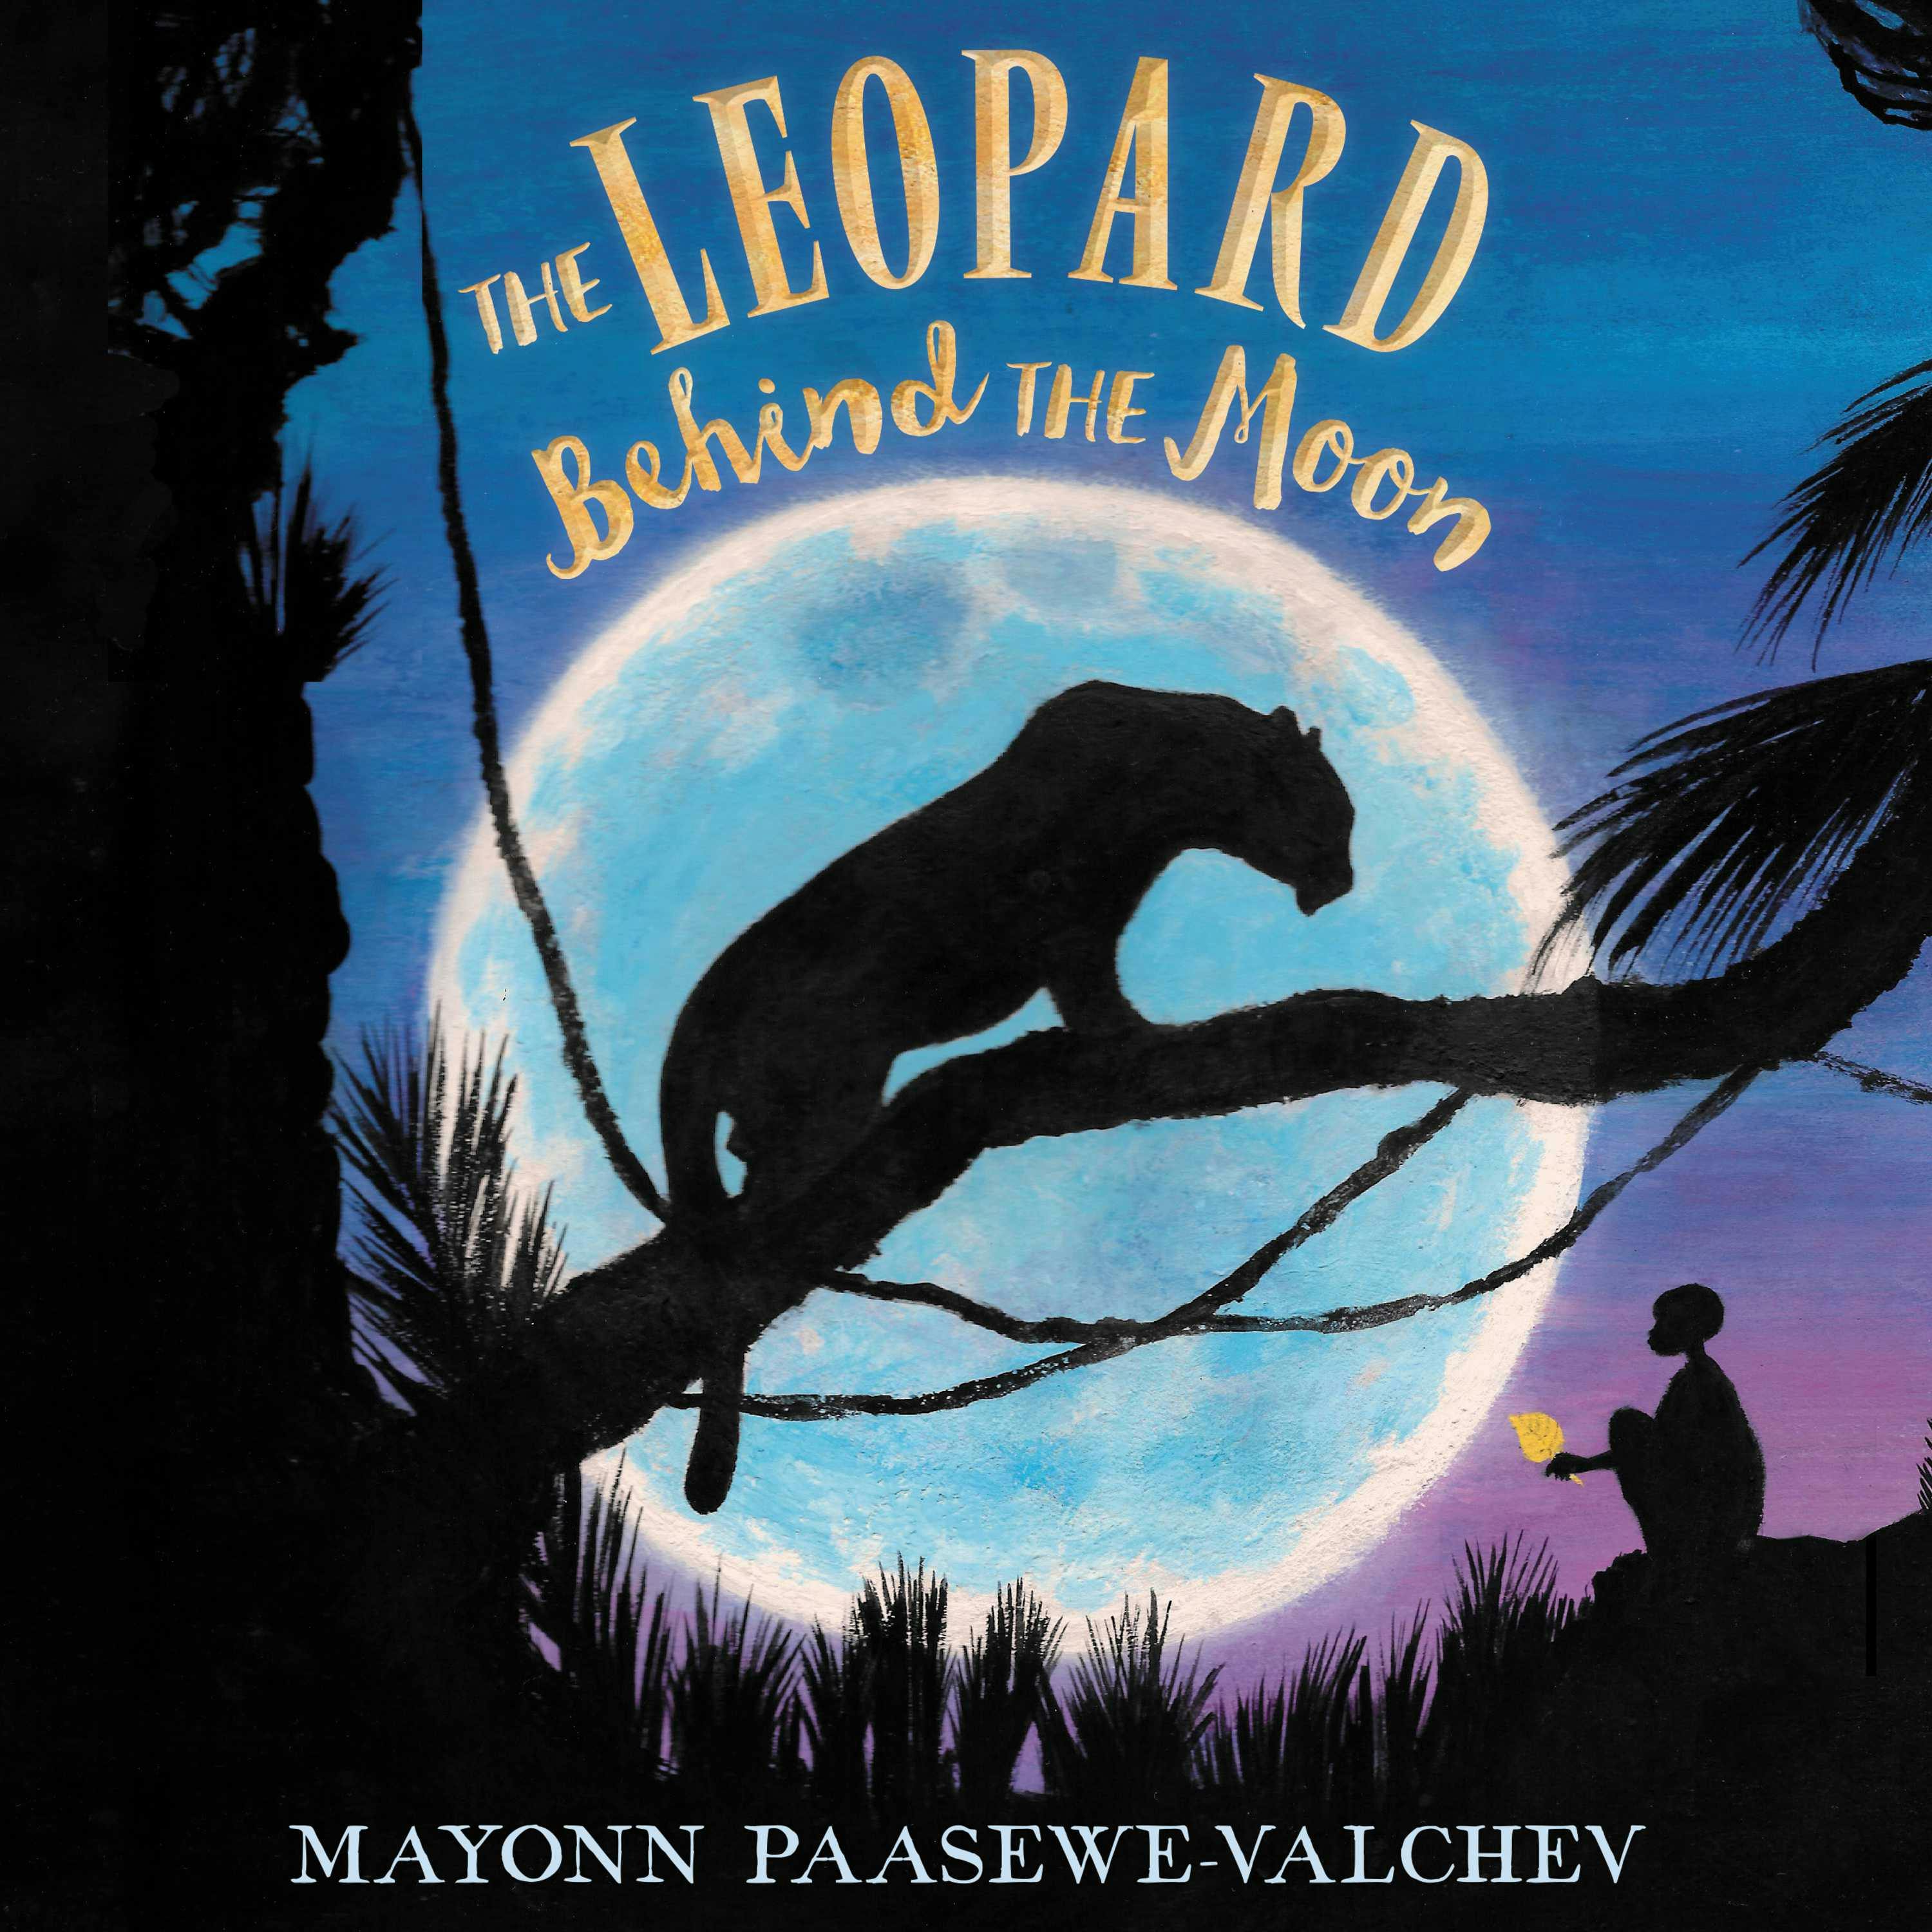 The Leopard Behind the Moon - undefined